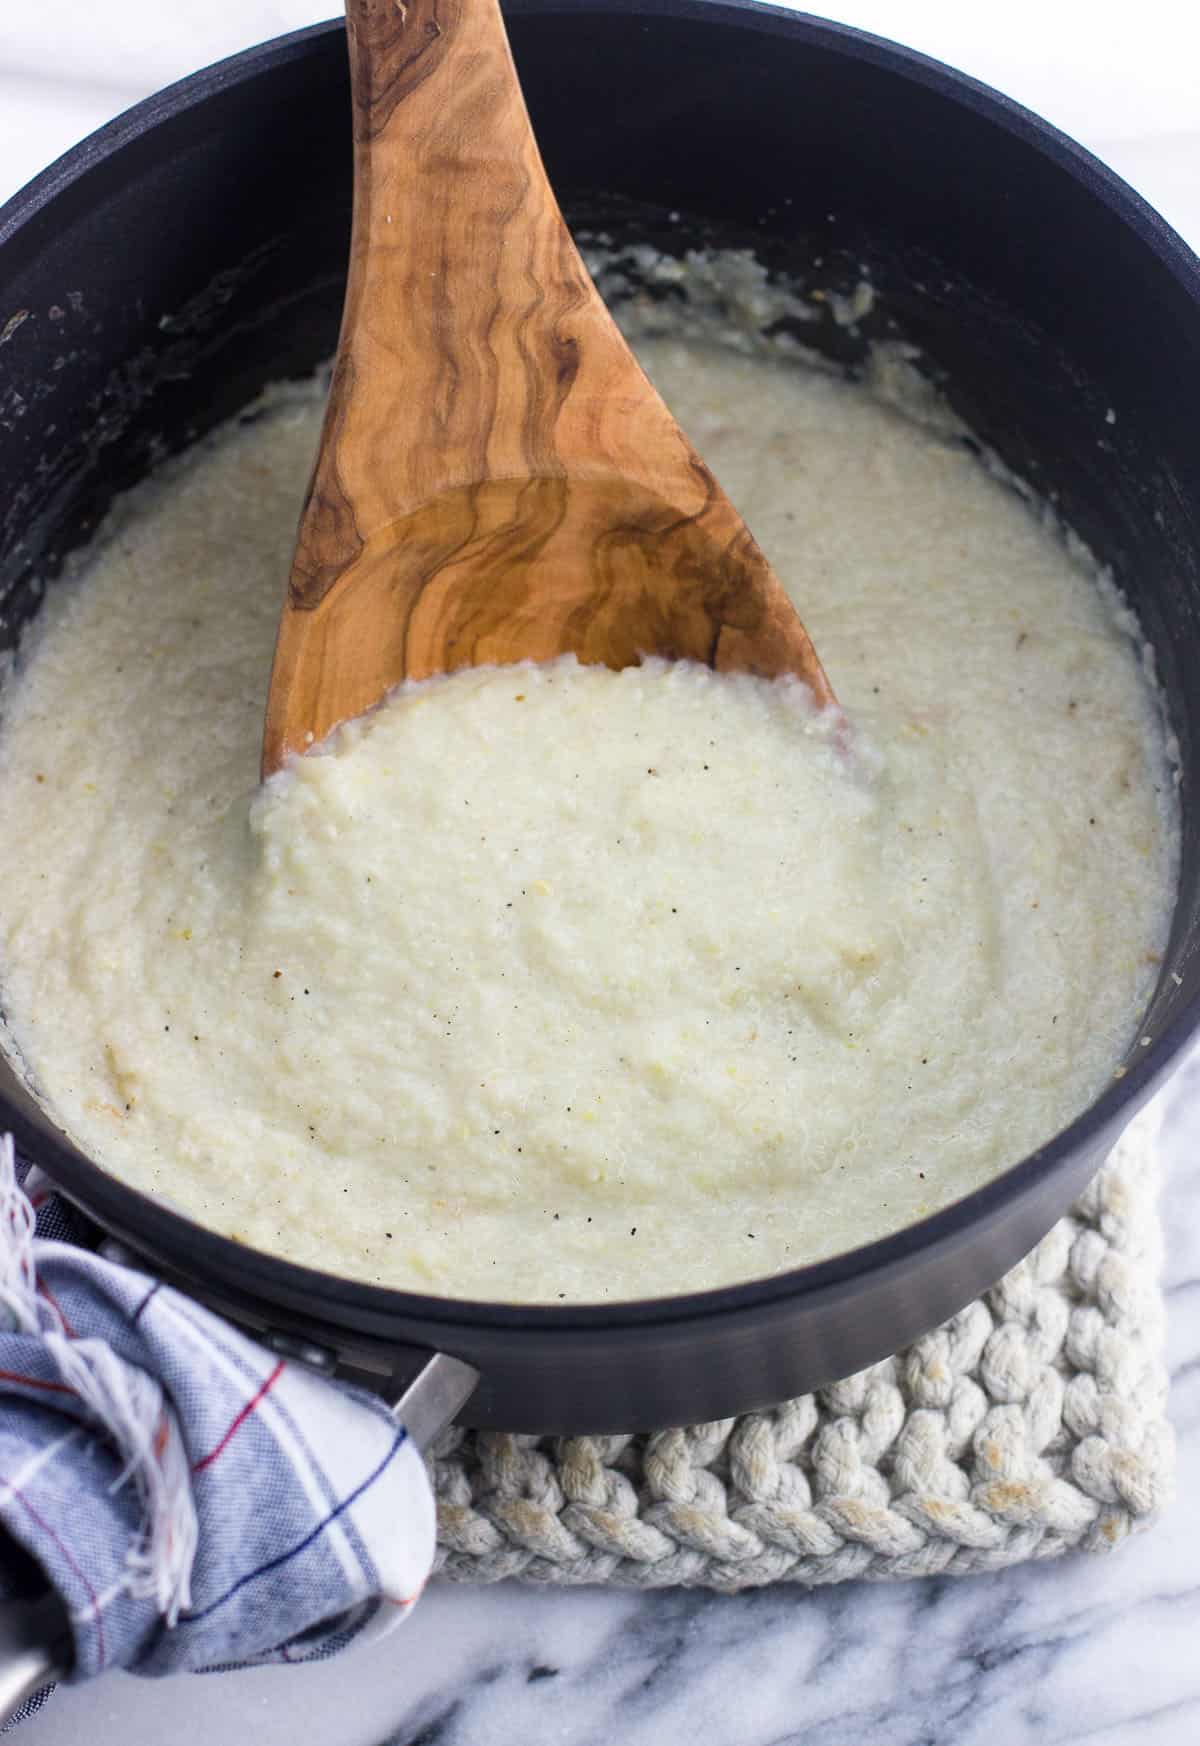 Parmesan grits in a medium saucepan with a wooden spoon.